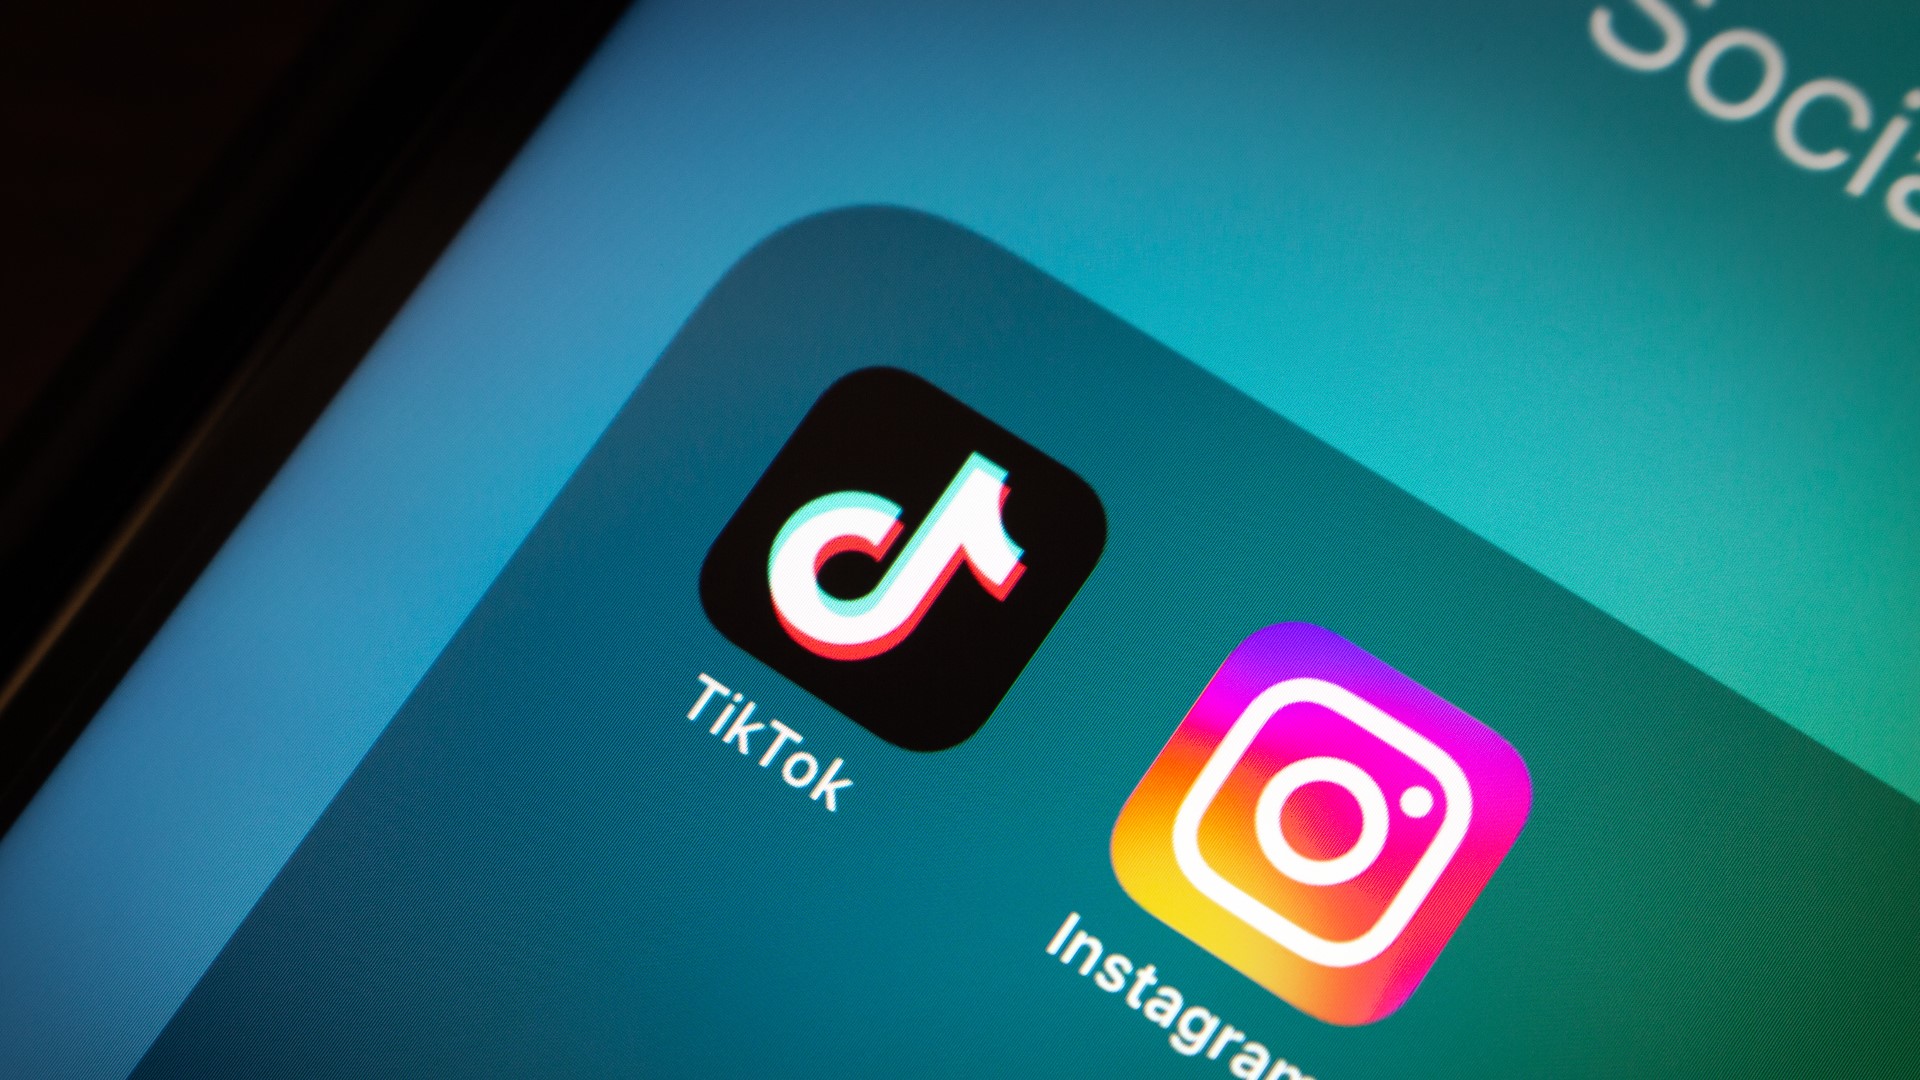 Seattle Public Schools is suing major social media companies behind TikTok, Instagram, Facebook, YouTube, and Snapchat over their impact on youth mental health.